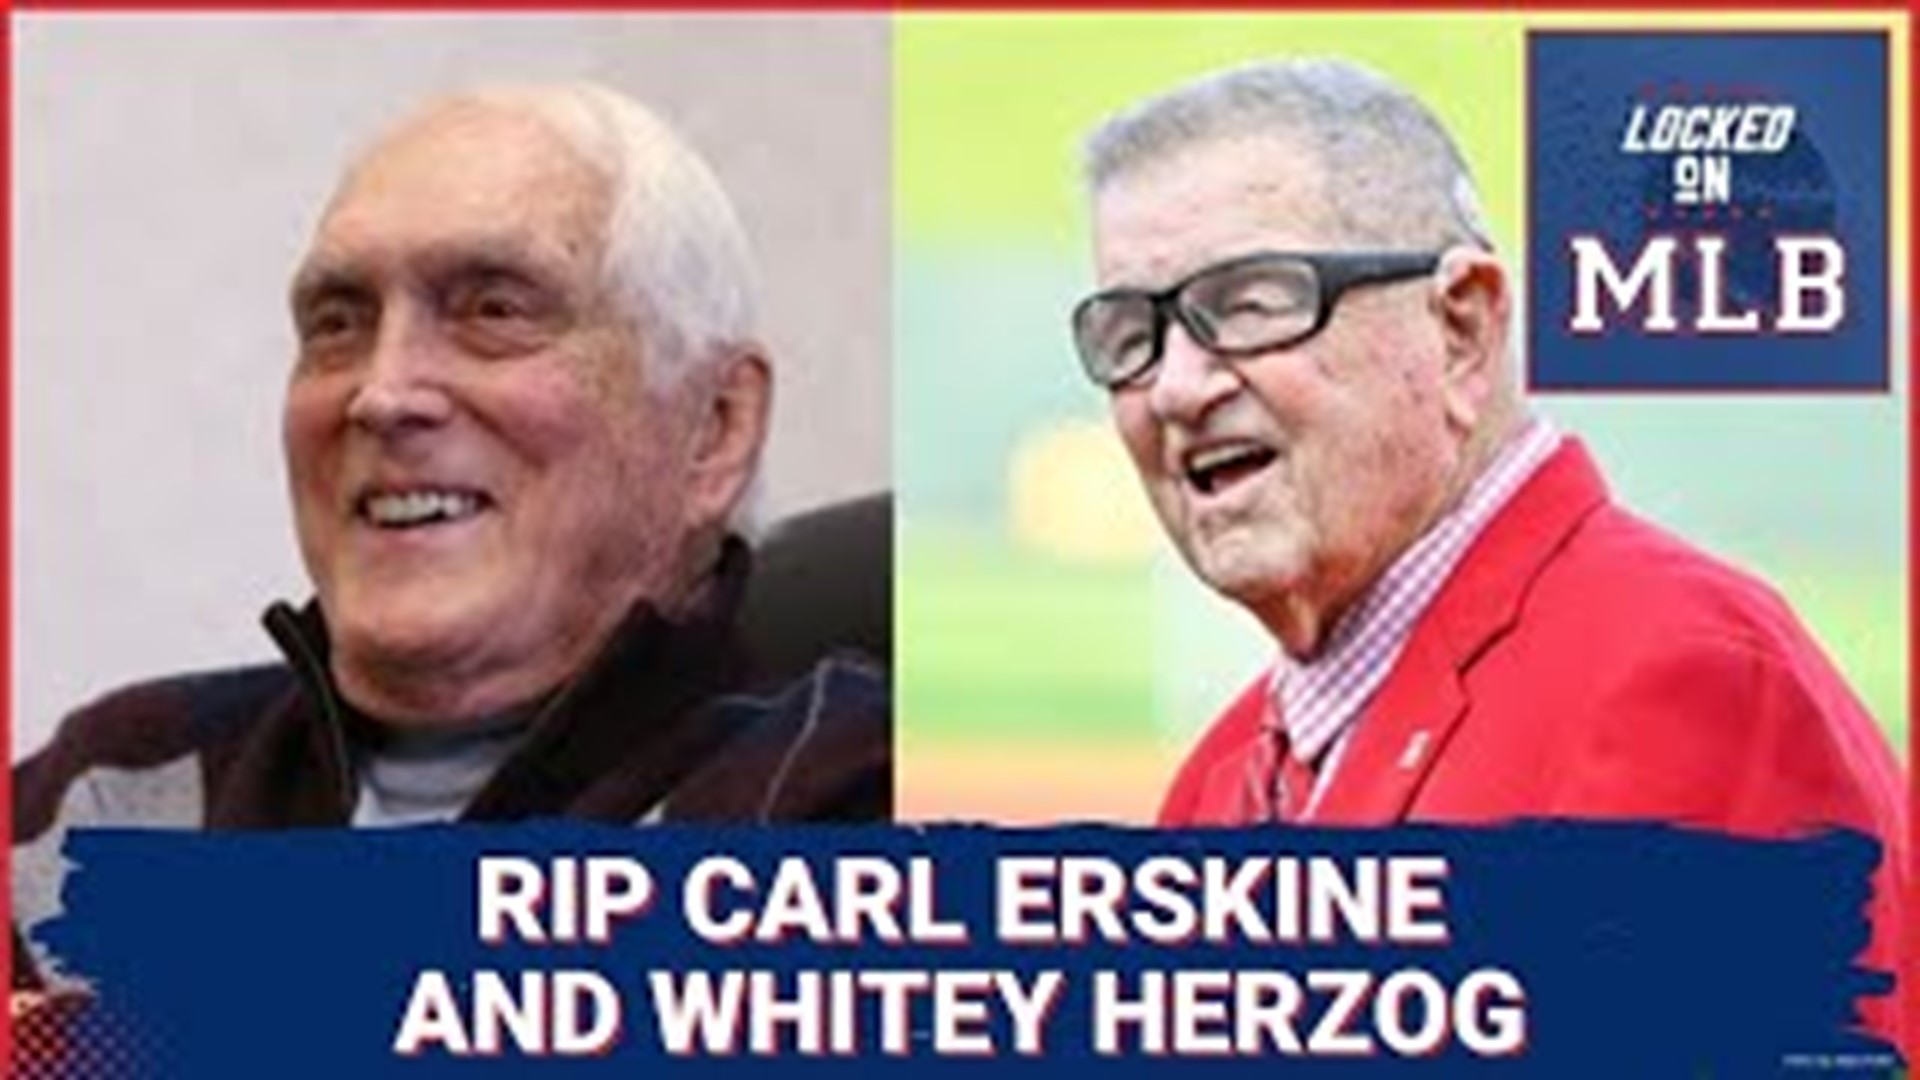 Hall of Fame manager Whitey Herzog died, leaving behind a legacy of pennants and defining National League baseball for a decade.